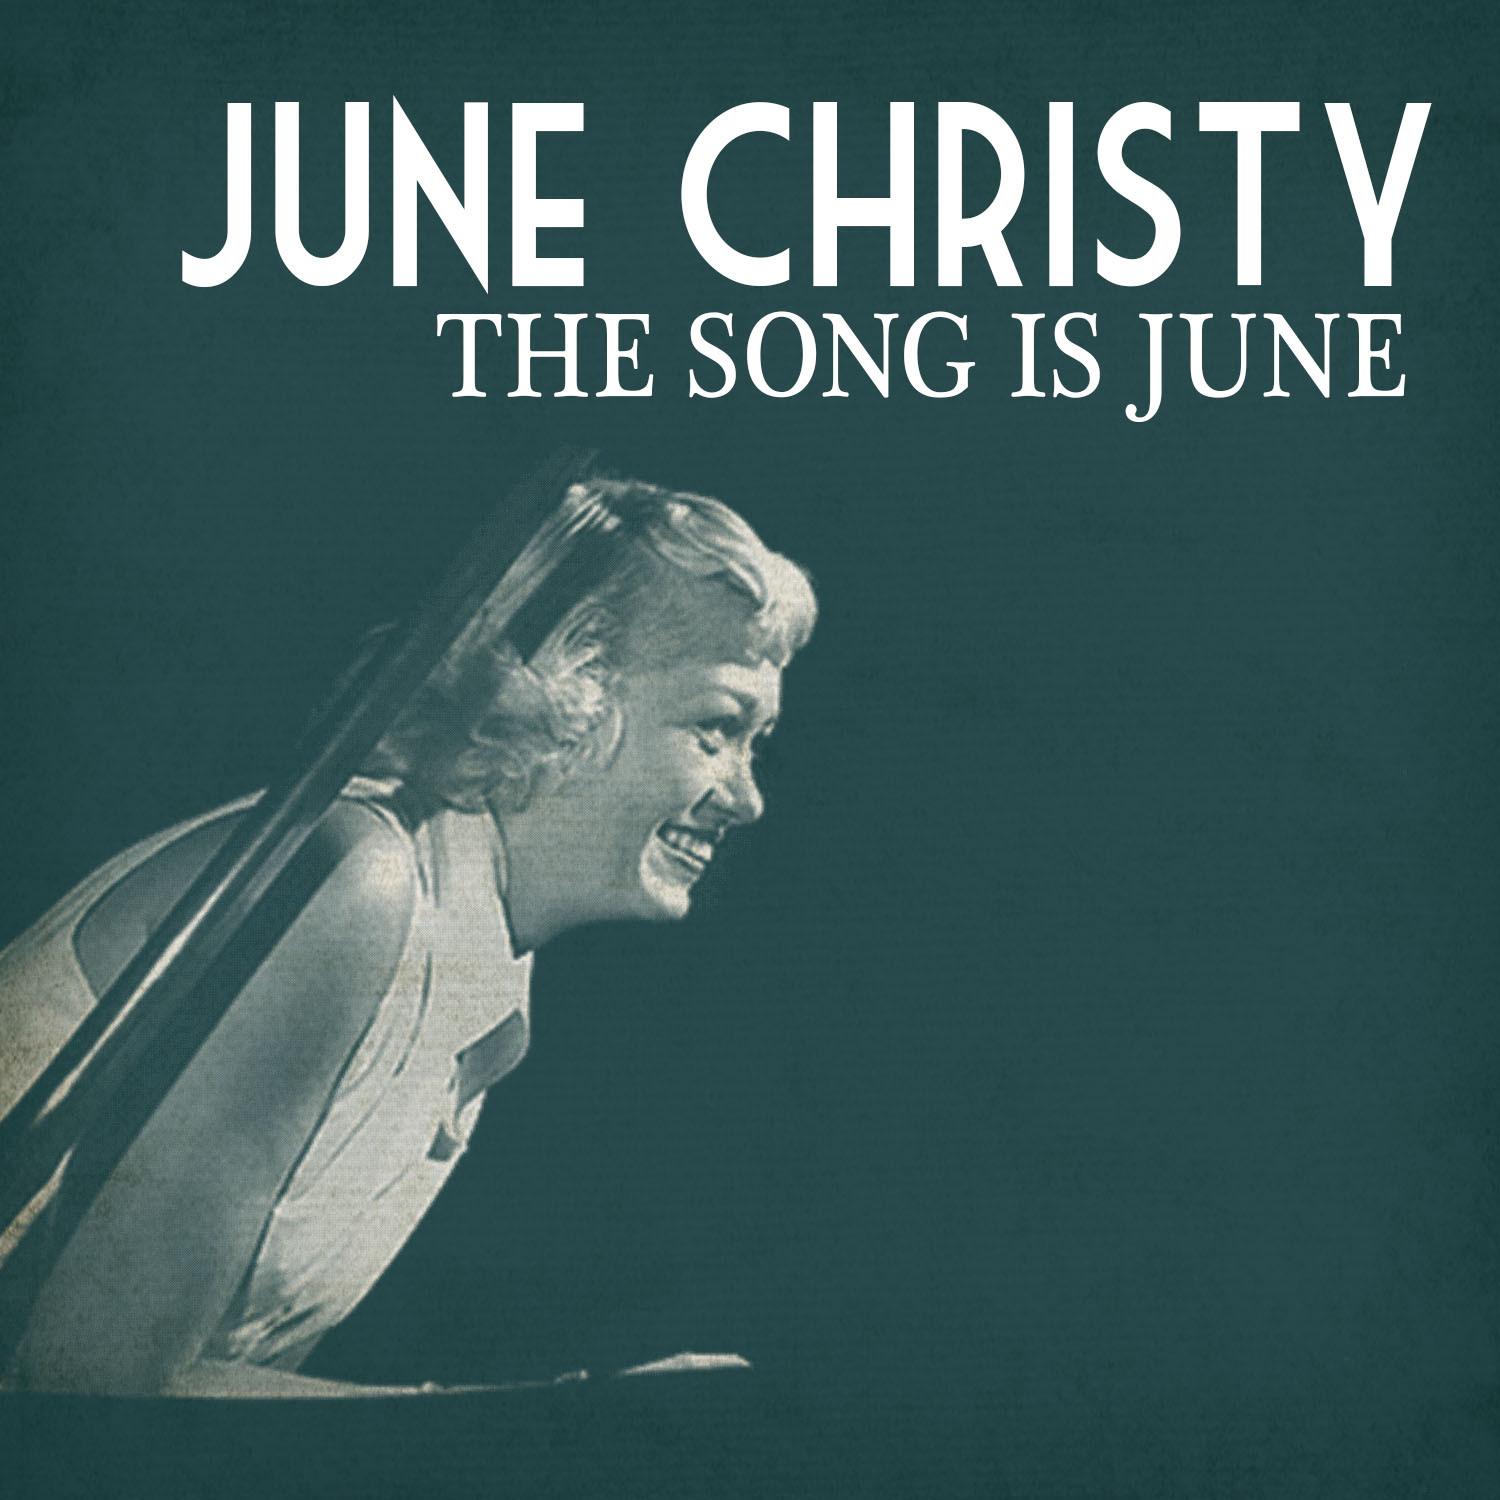 The Song Is June